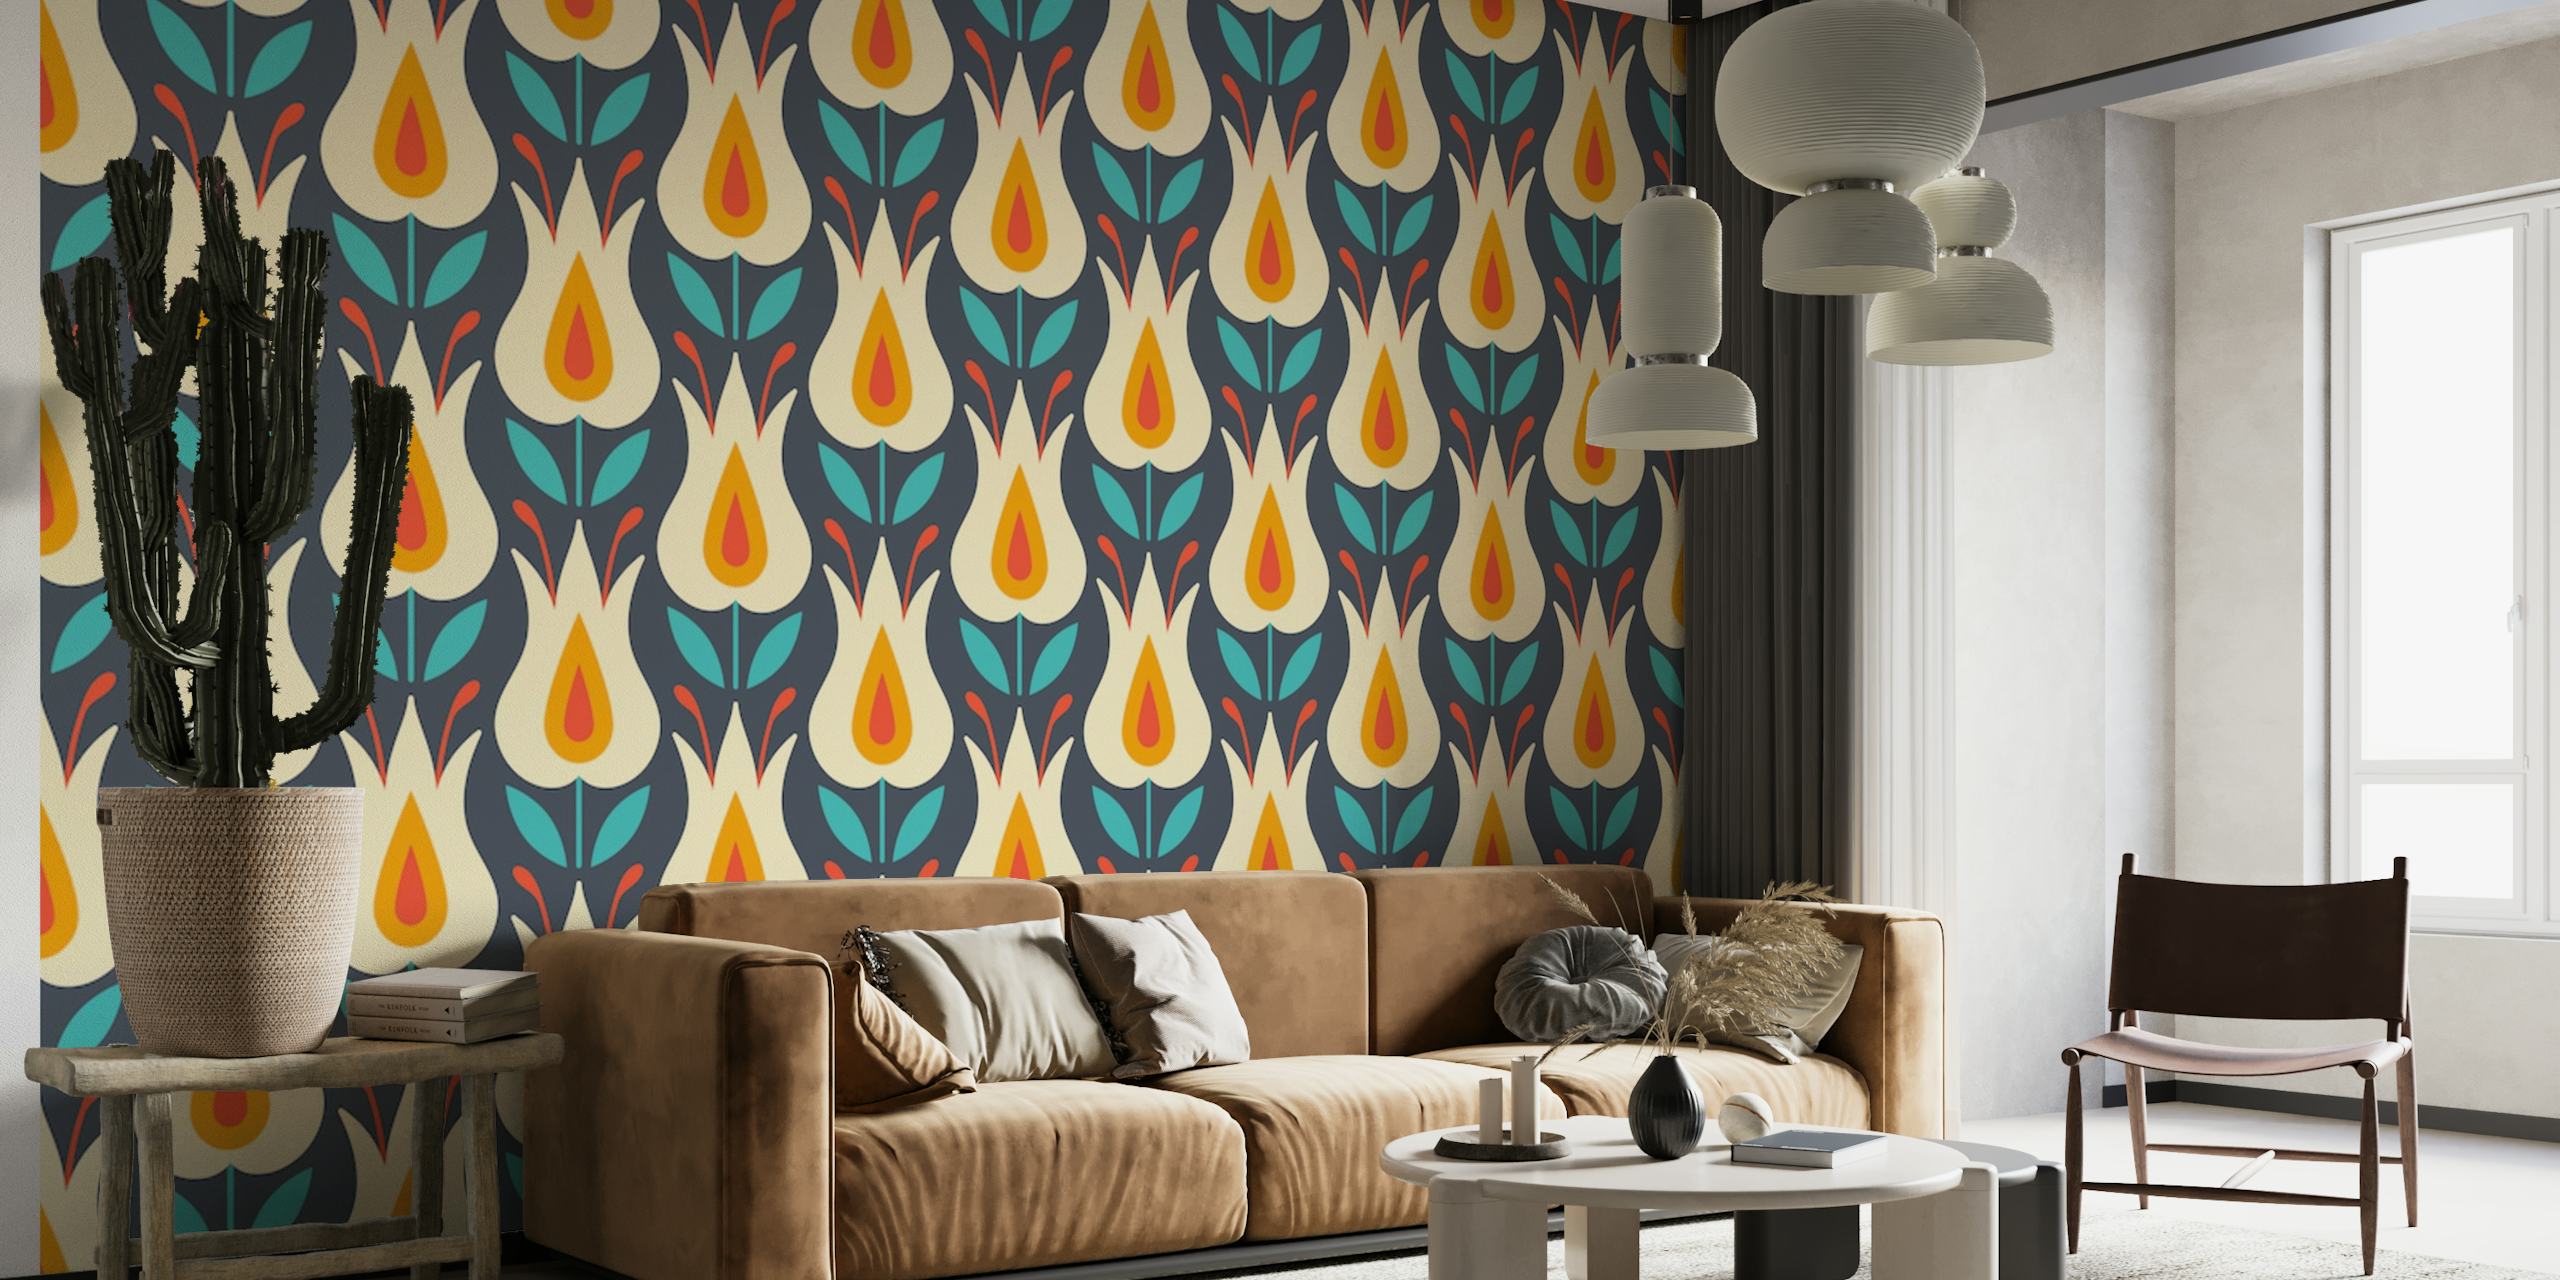 Abstract floral wall mural with warm tones and rhythmic patterns